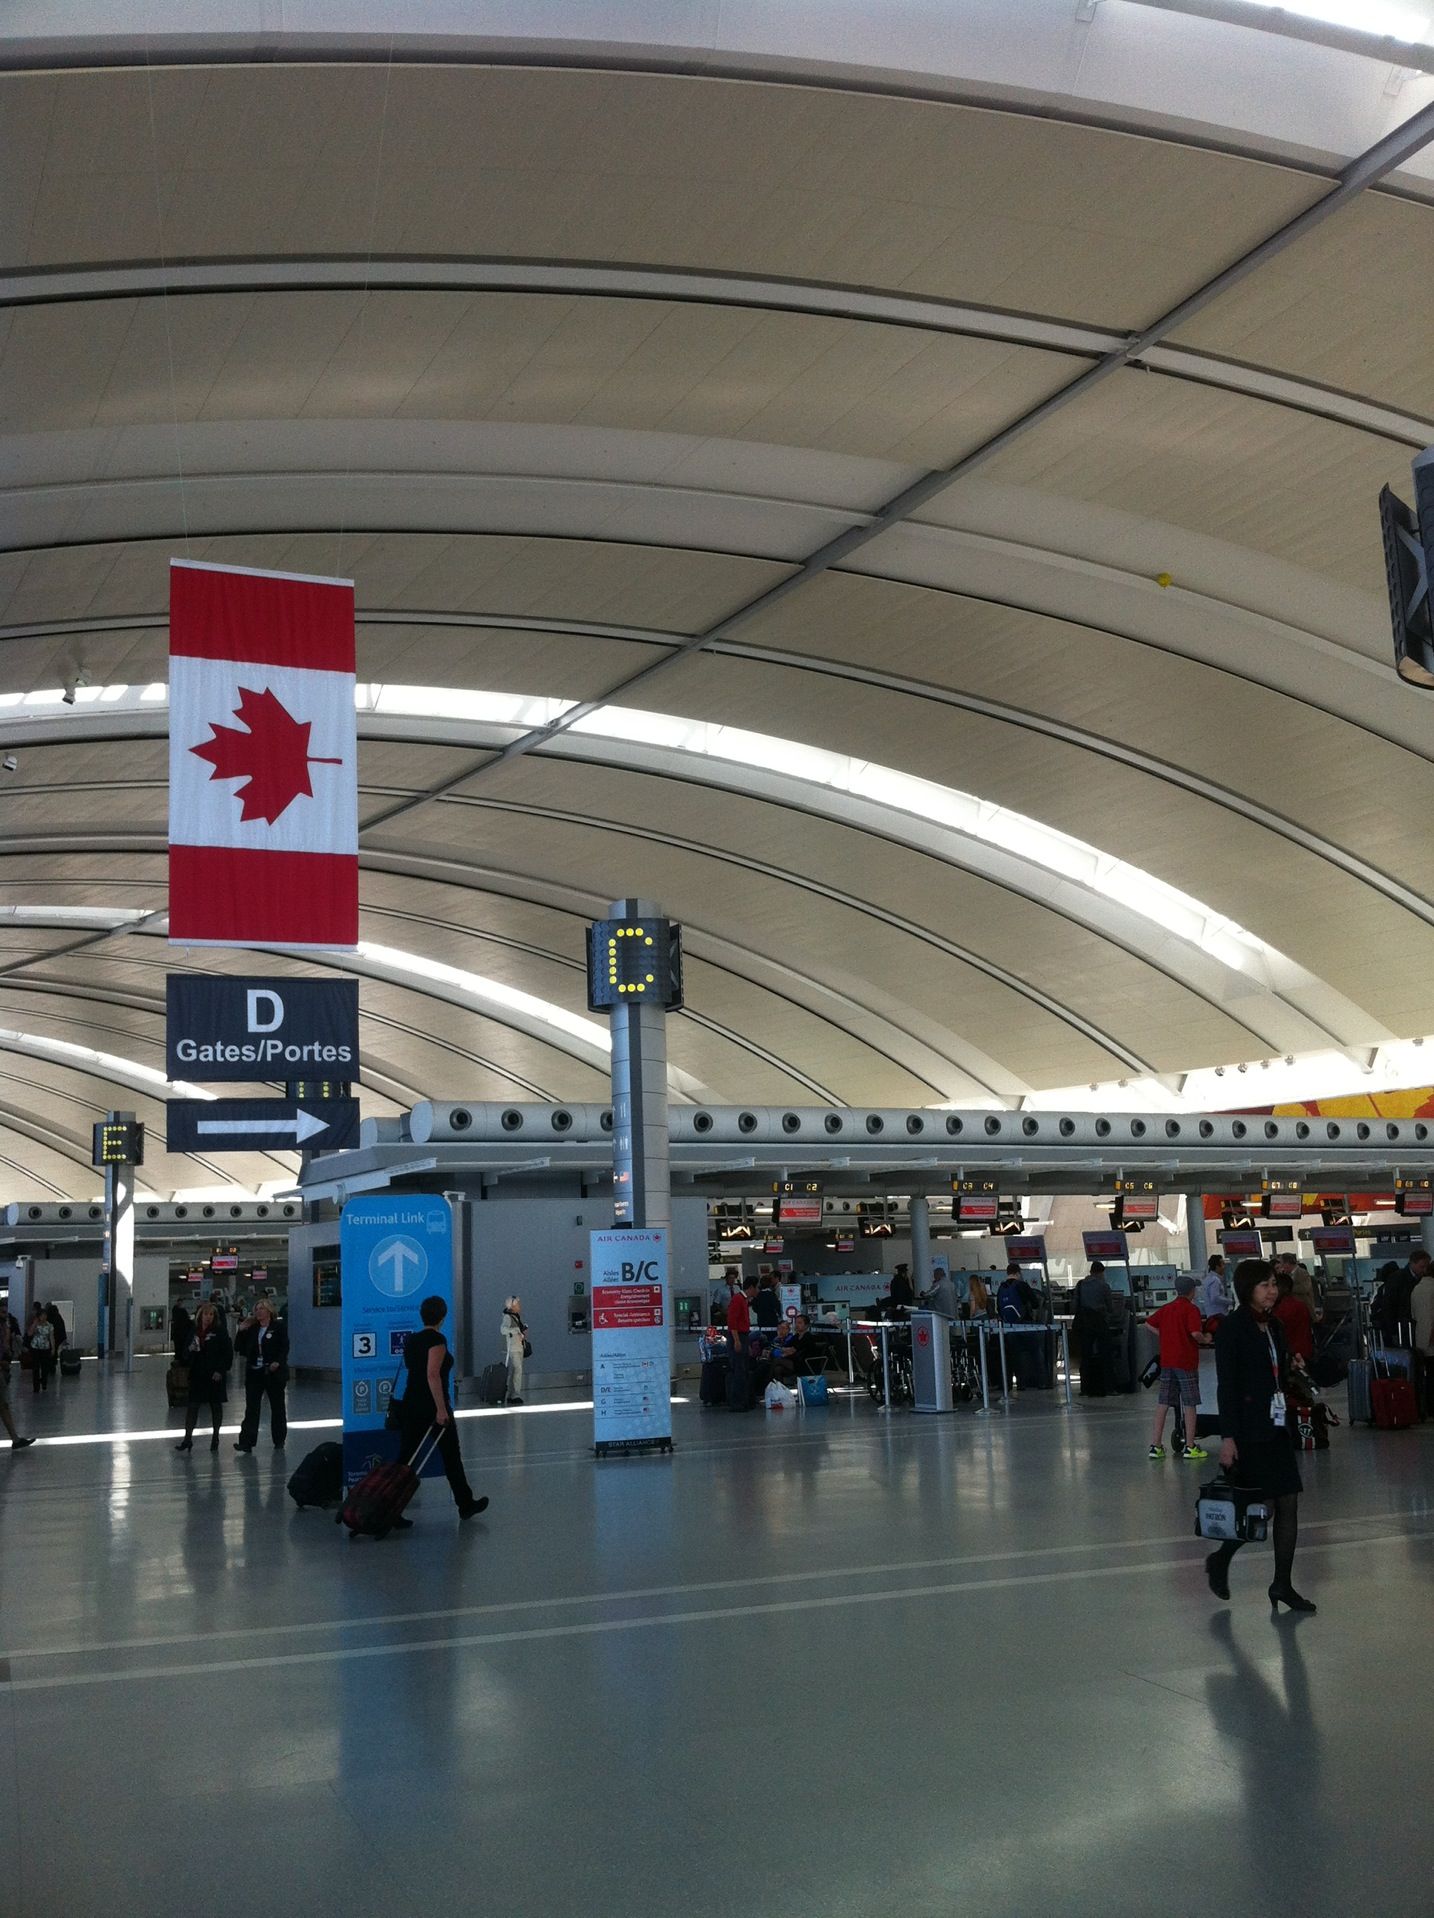 Visitors in Canada Continue to Have Access to Work Permits